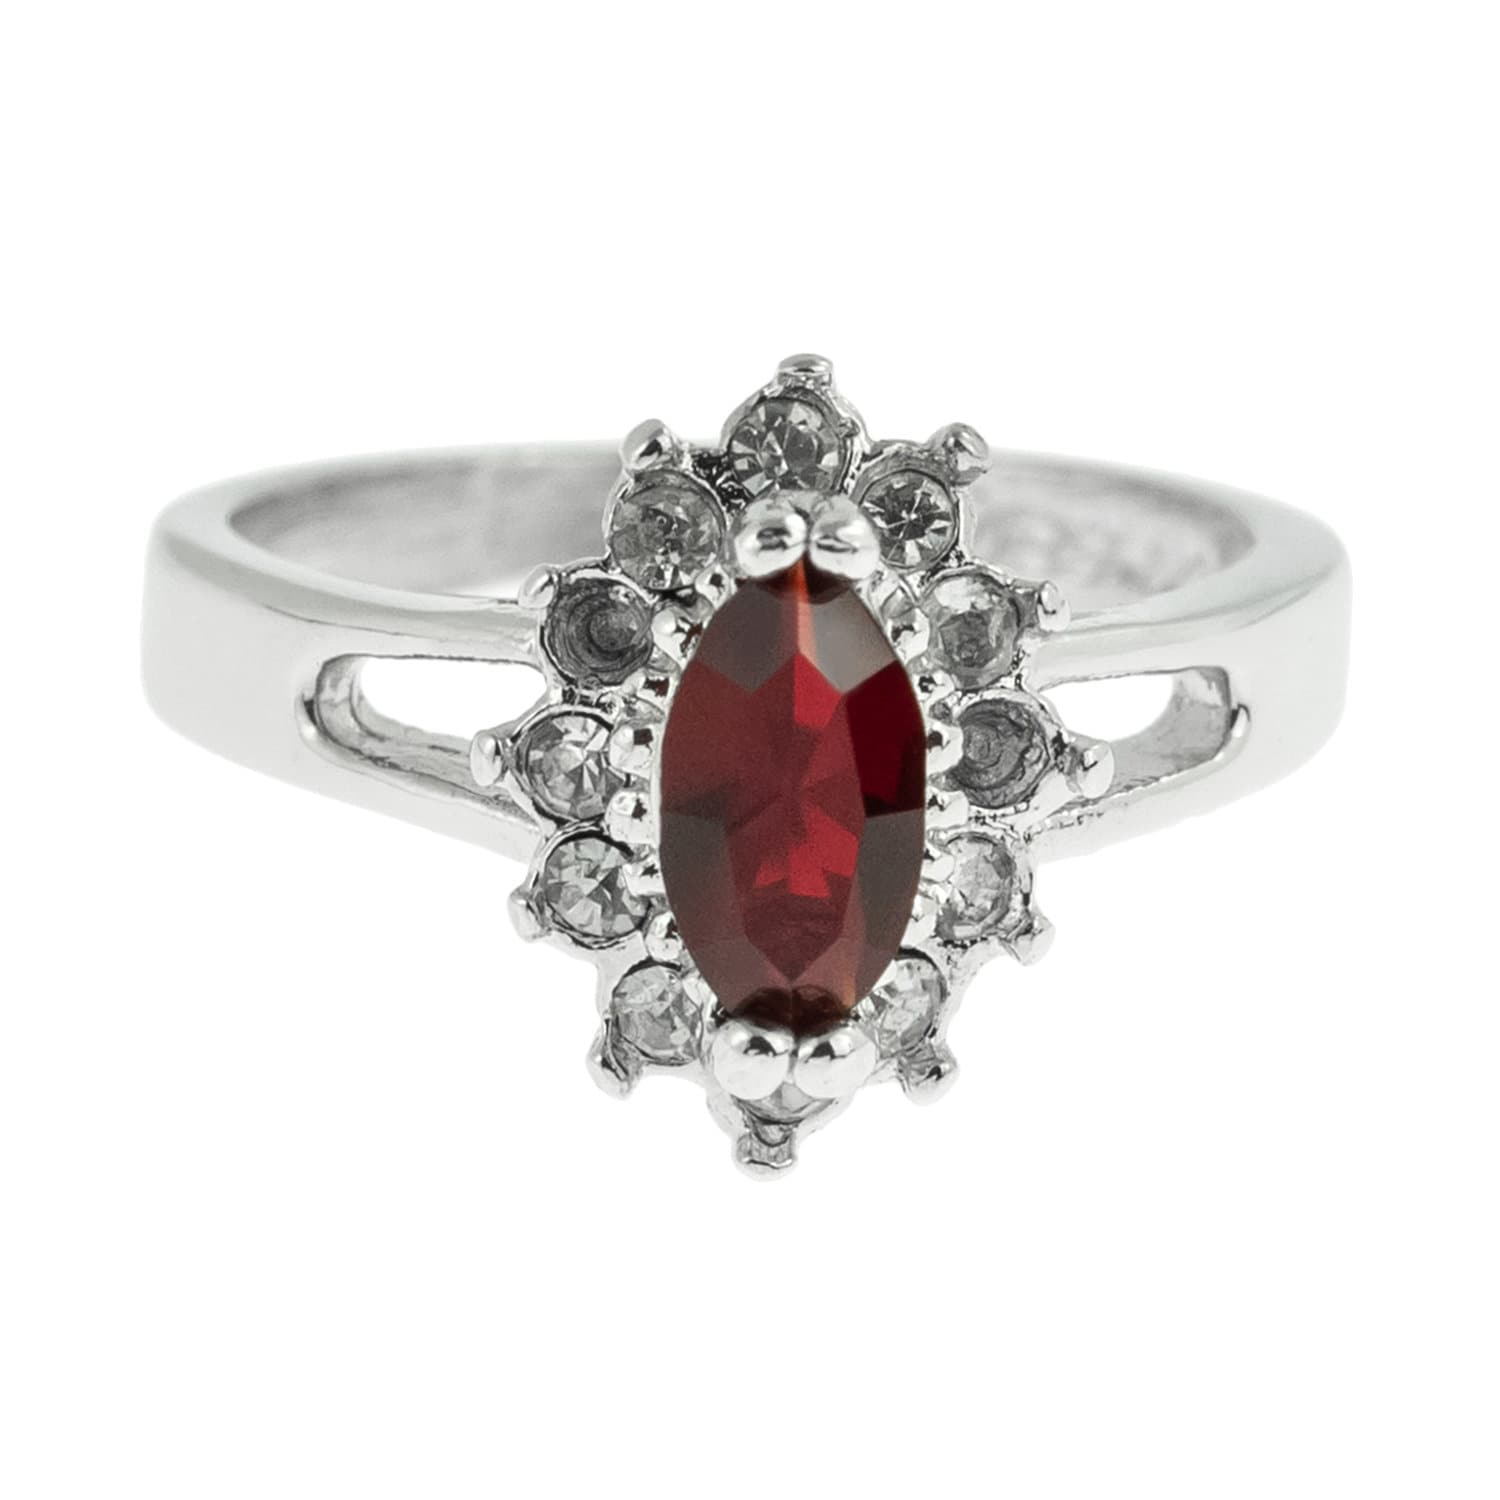 Vintage Ring Ruby and Clear Swarovski Crystals 18kt White Gold Silver July Birthstone #R1314 - Limited Stock - Never Worn